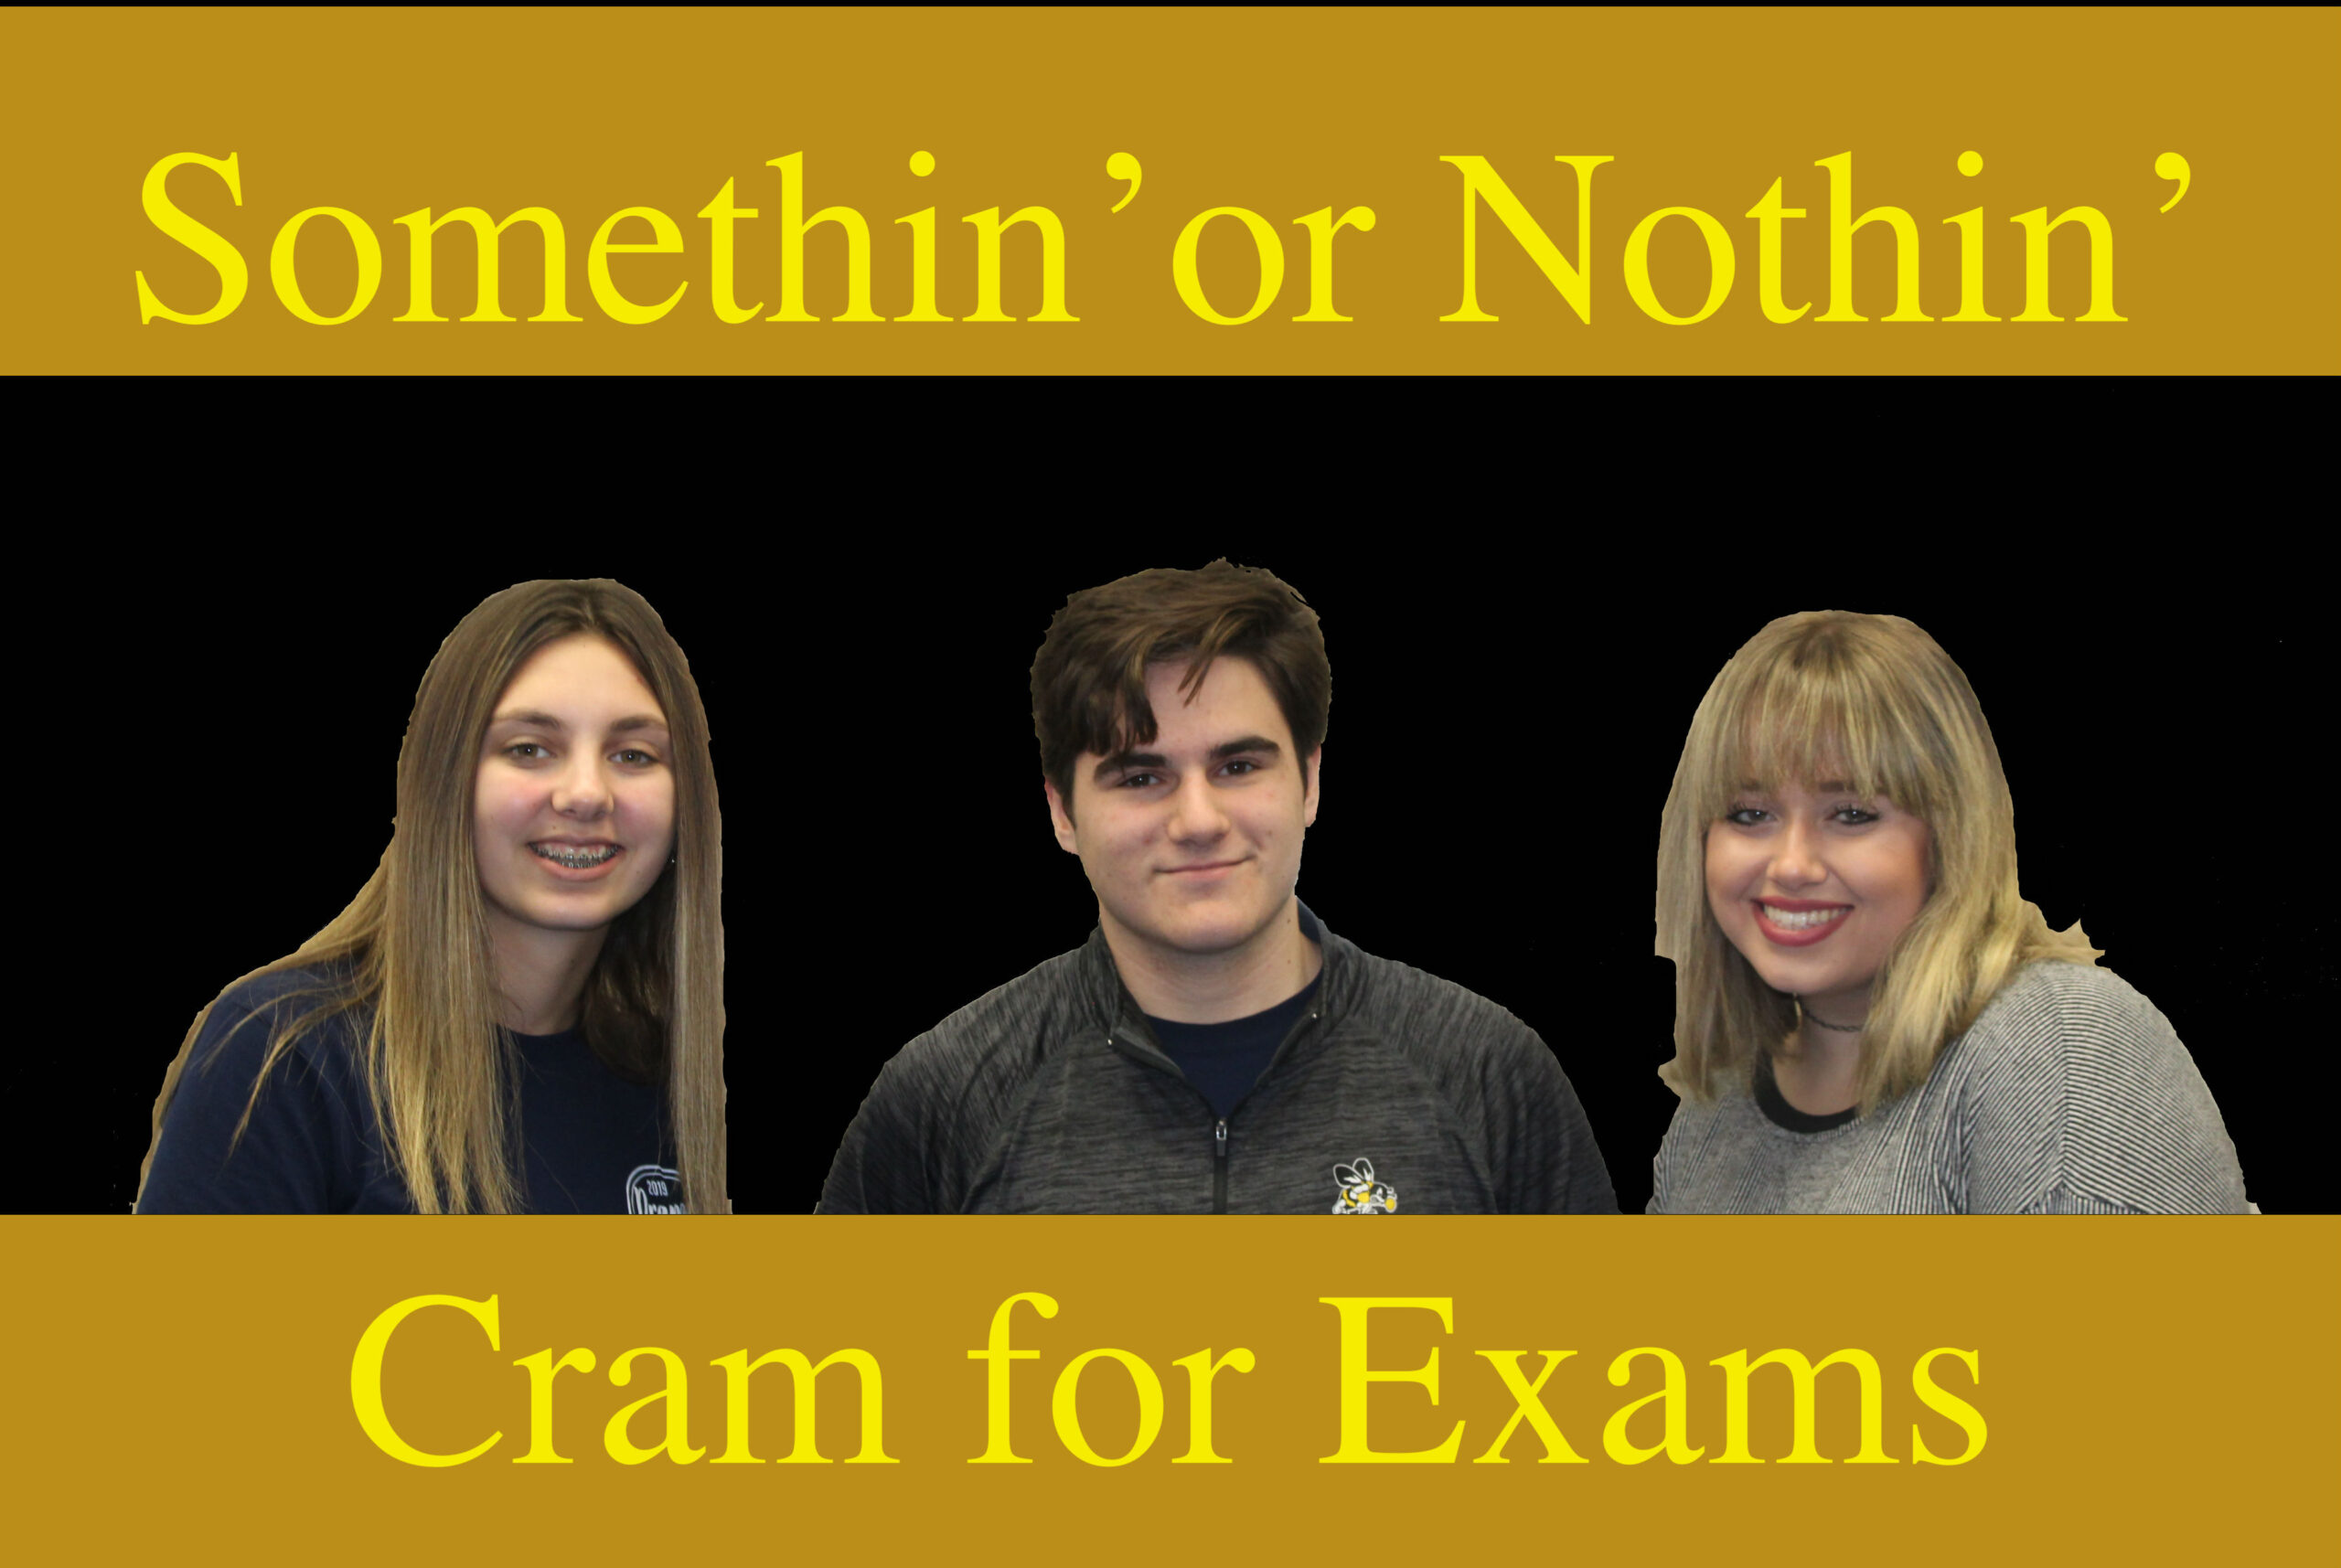 Cram for exams podcast thumbnail.